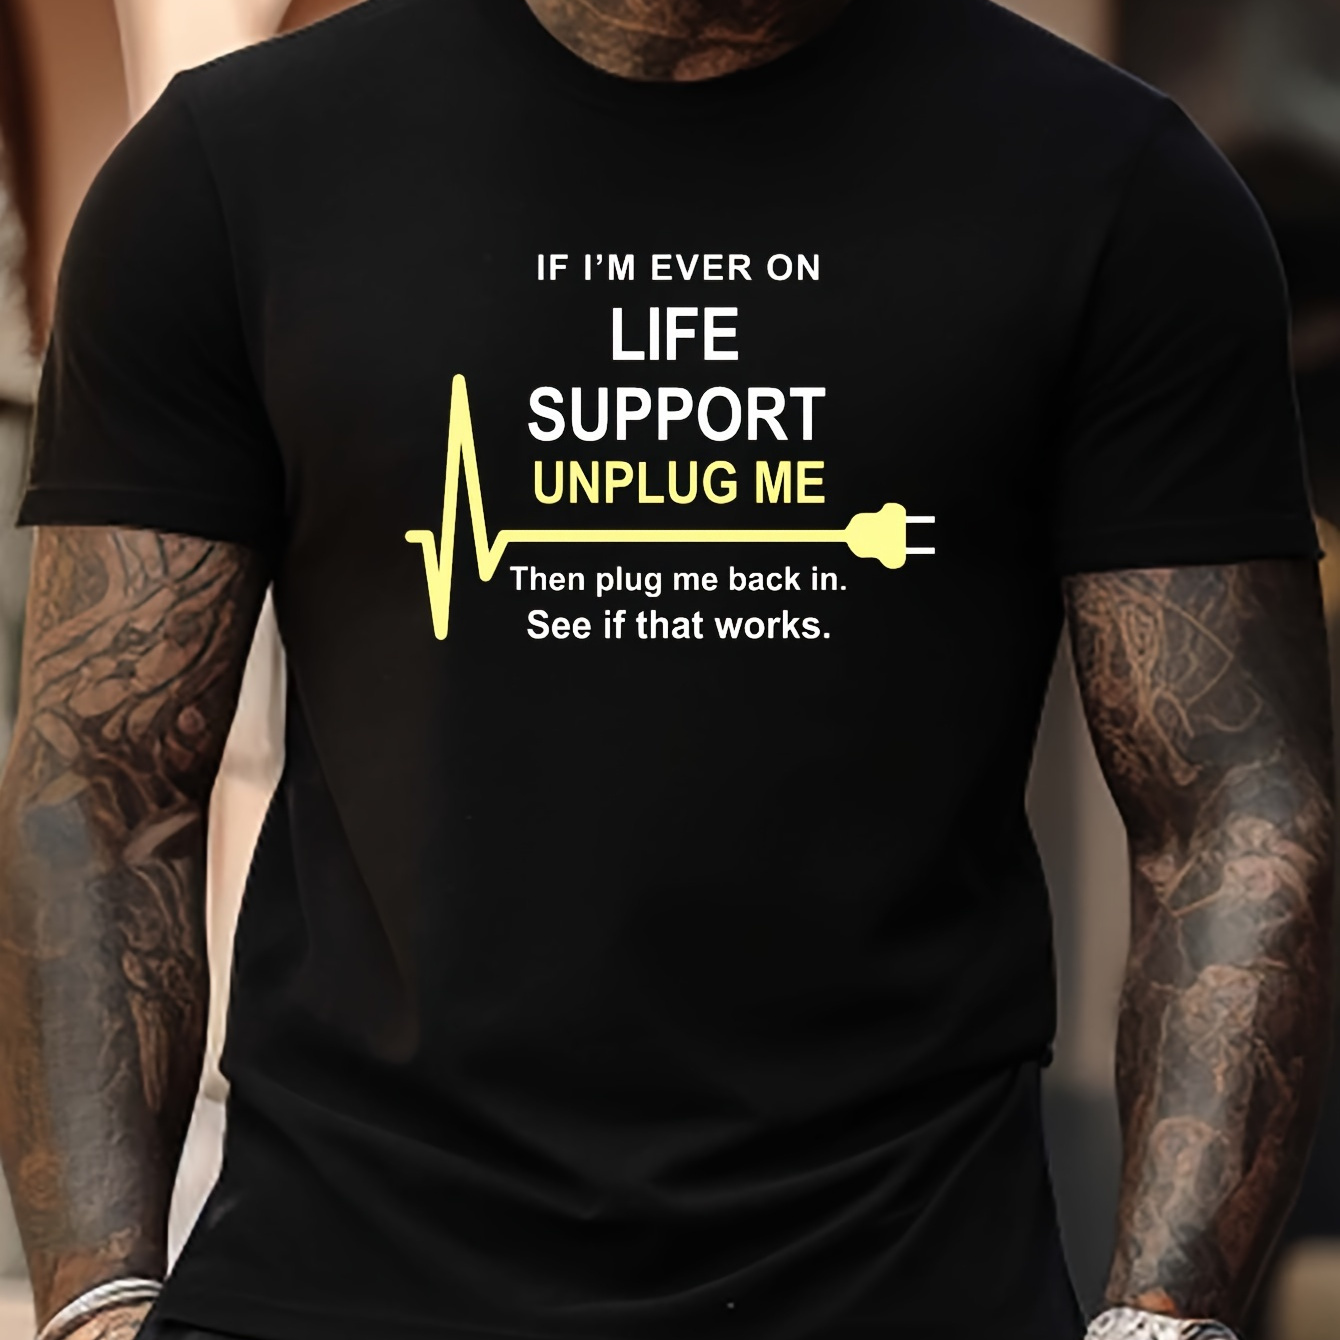 

Life Support Print, Men's Graphic Design Crew Neck Active T-shirt, Casual Comfy Tees Tshirts For Summer, Men's Clothing Tops For Daily Gym Workout Running